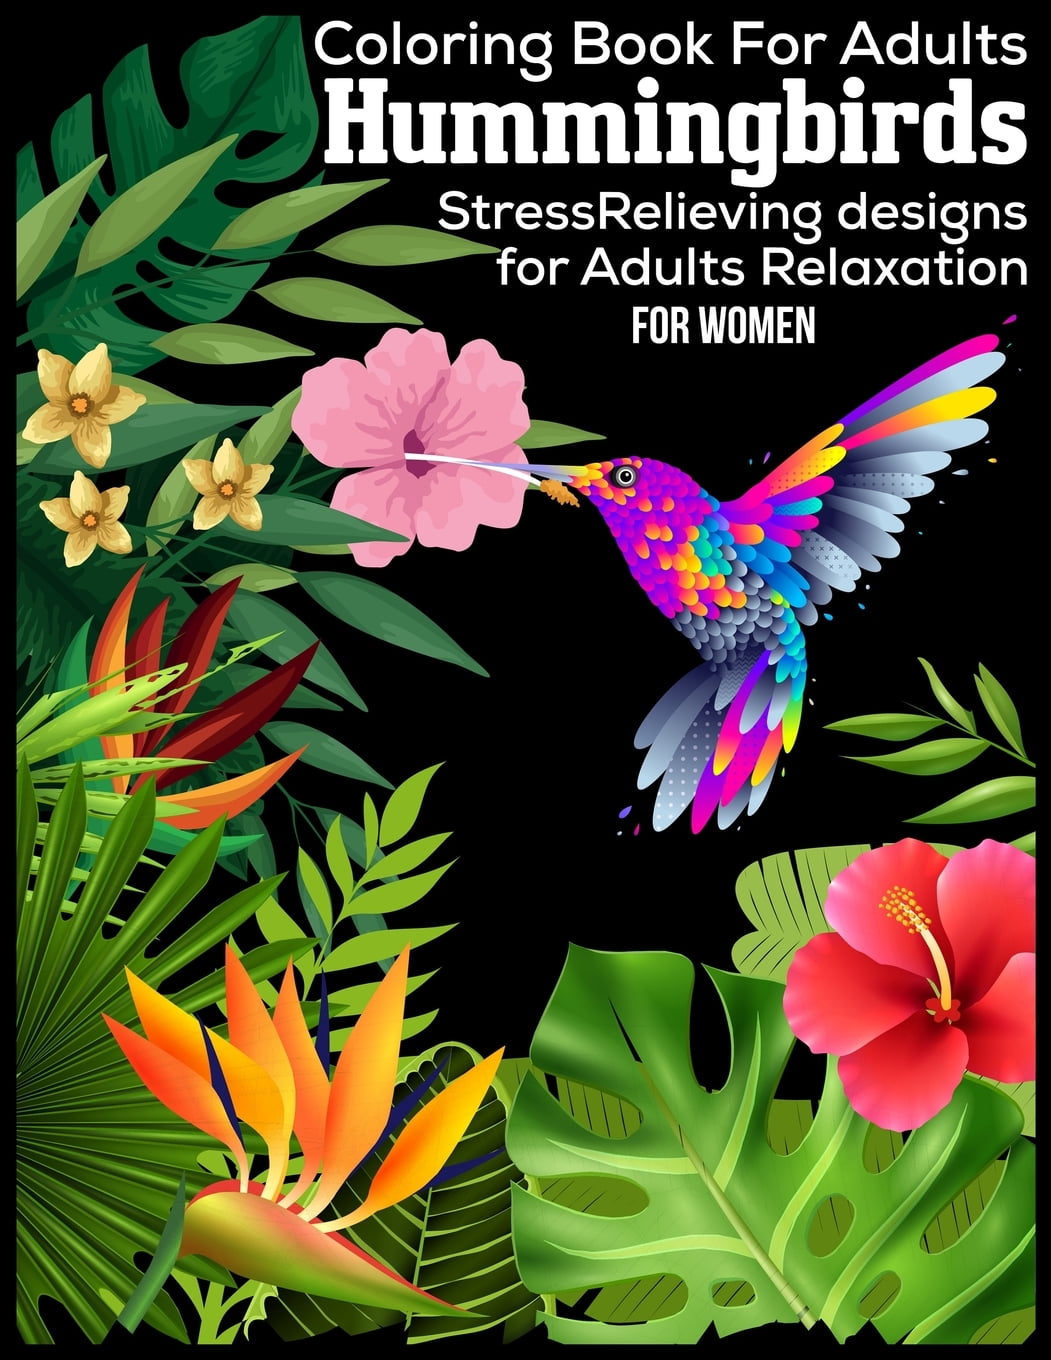 Download Coloring Book For Adults Hummingbirds StressRelieving ...